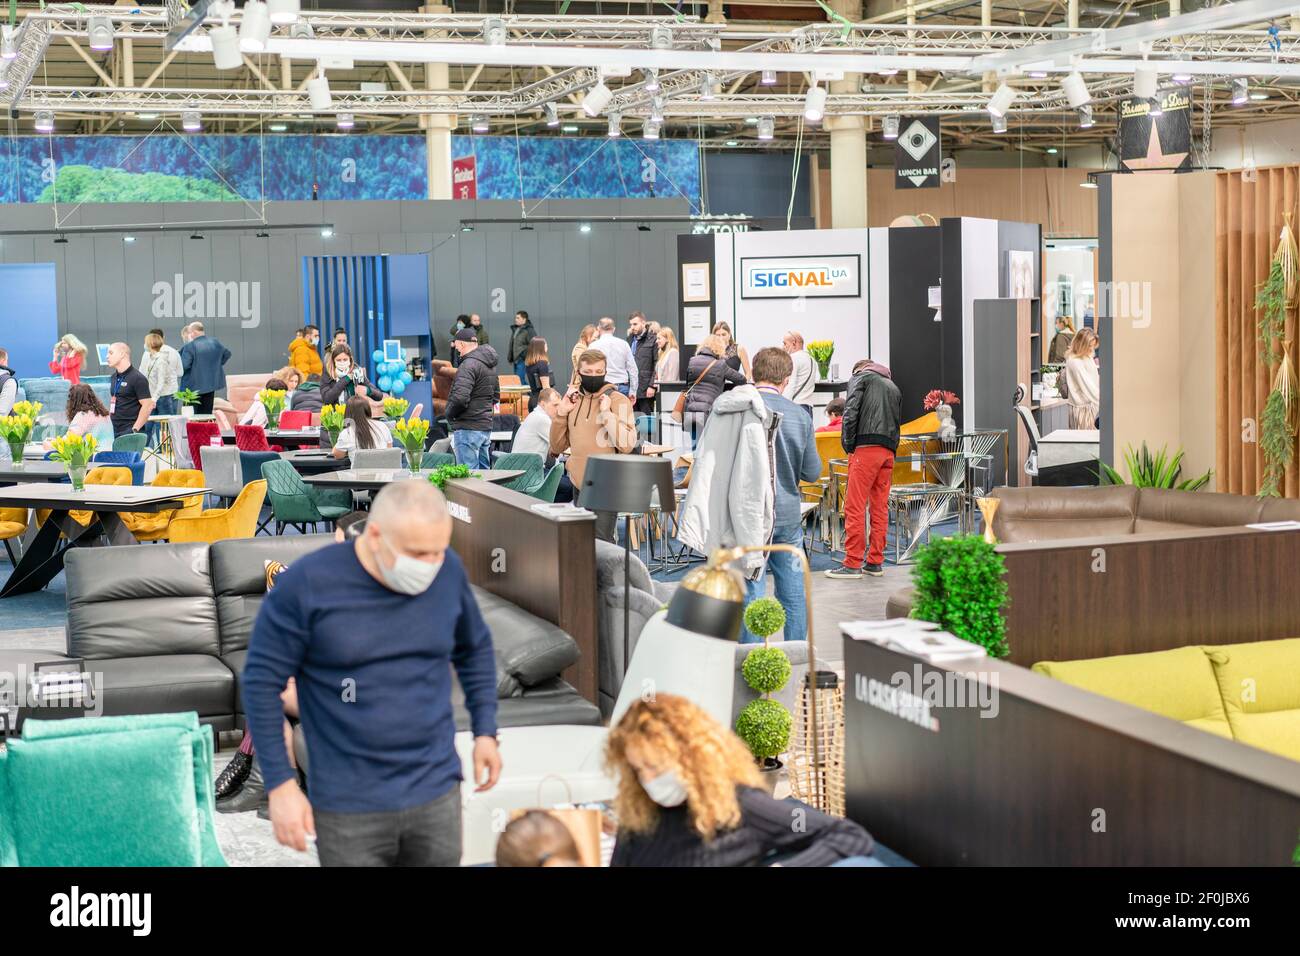 Kiev, Ukraine March 5 2021. Furniture exhibition during a pandemic. international furnishing accessories exhibition. People wearing medical masks Stock Photo